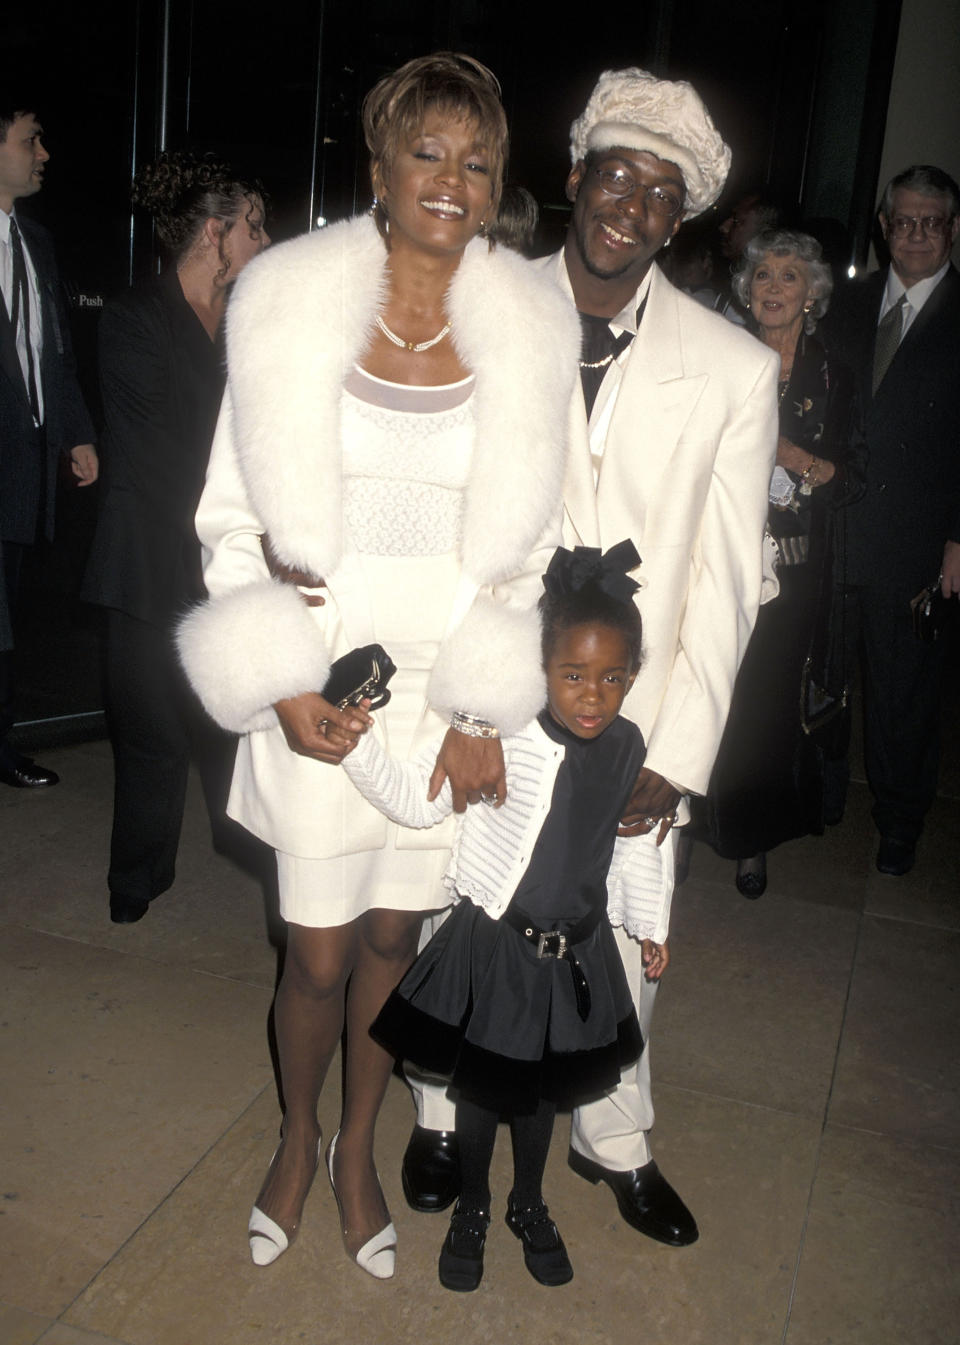 Singer Whitney Houston, singer Bobby Brown and daughter Bobbi Kristina Brown attend the Fourth Annual International Achievement in Arts Awards on October 11, 1998 at Beverly Hilton Hotel in Beverly Hills, California. (Photo by Ron Galella, Ltd./Ron Galella Collection via Getty Images)